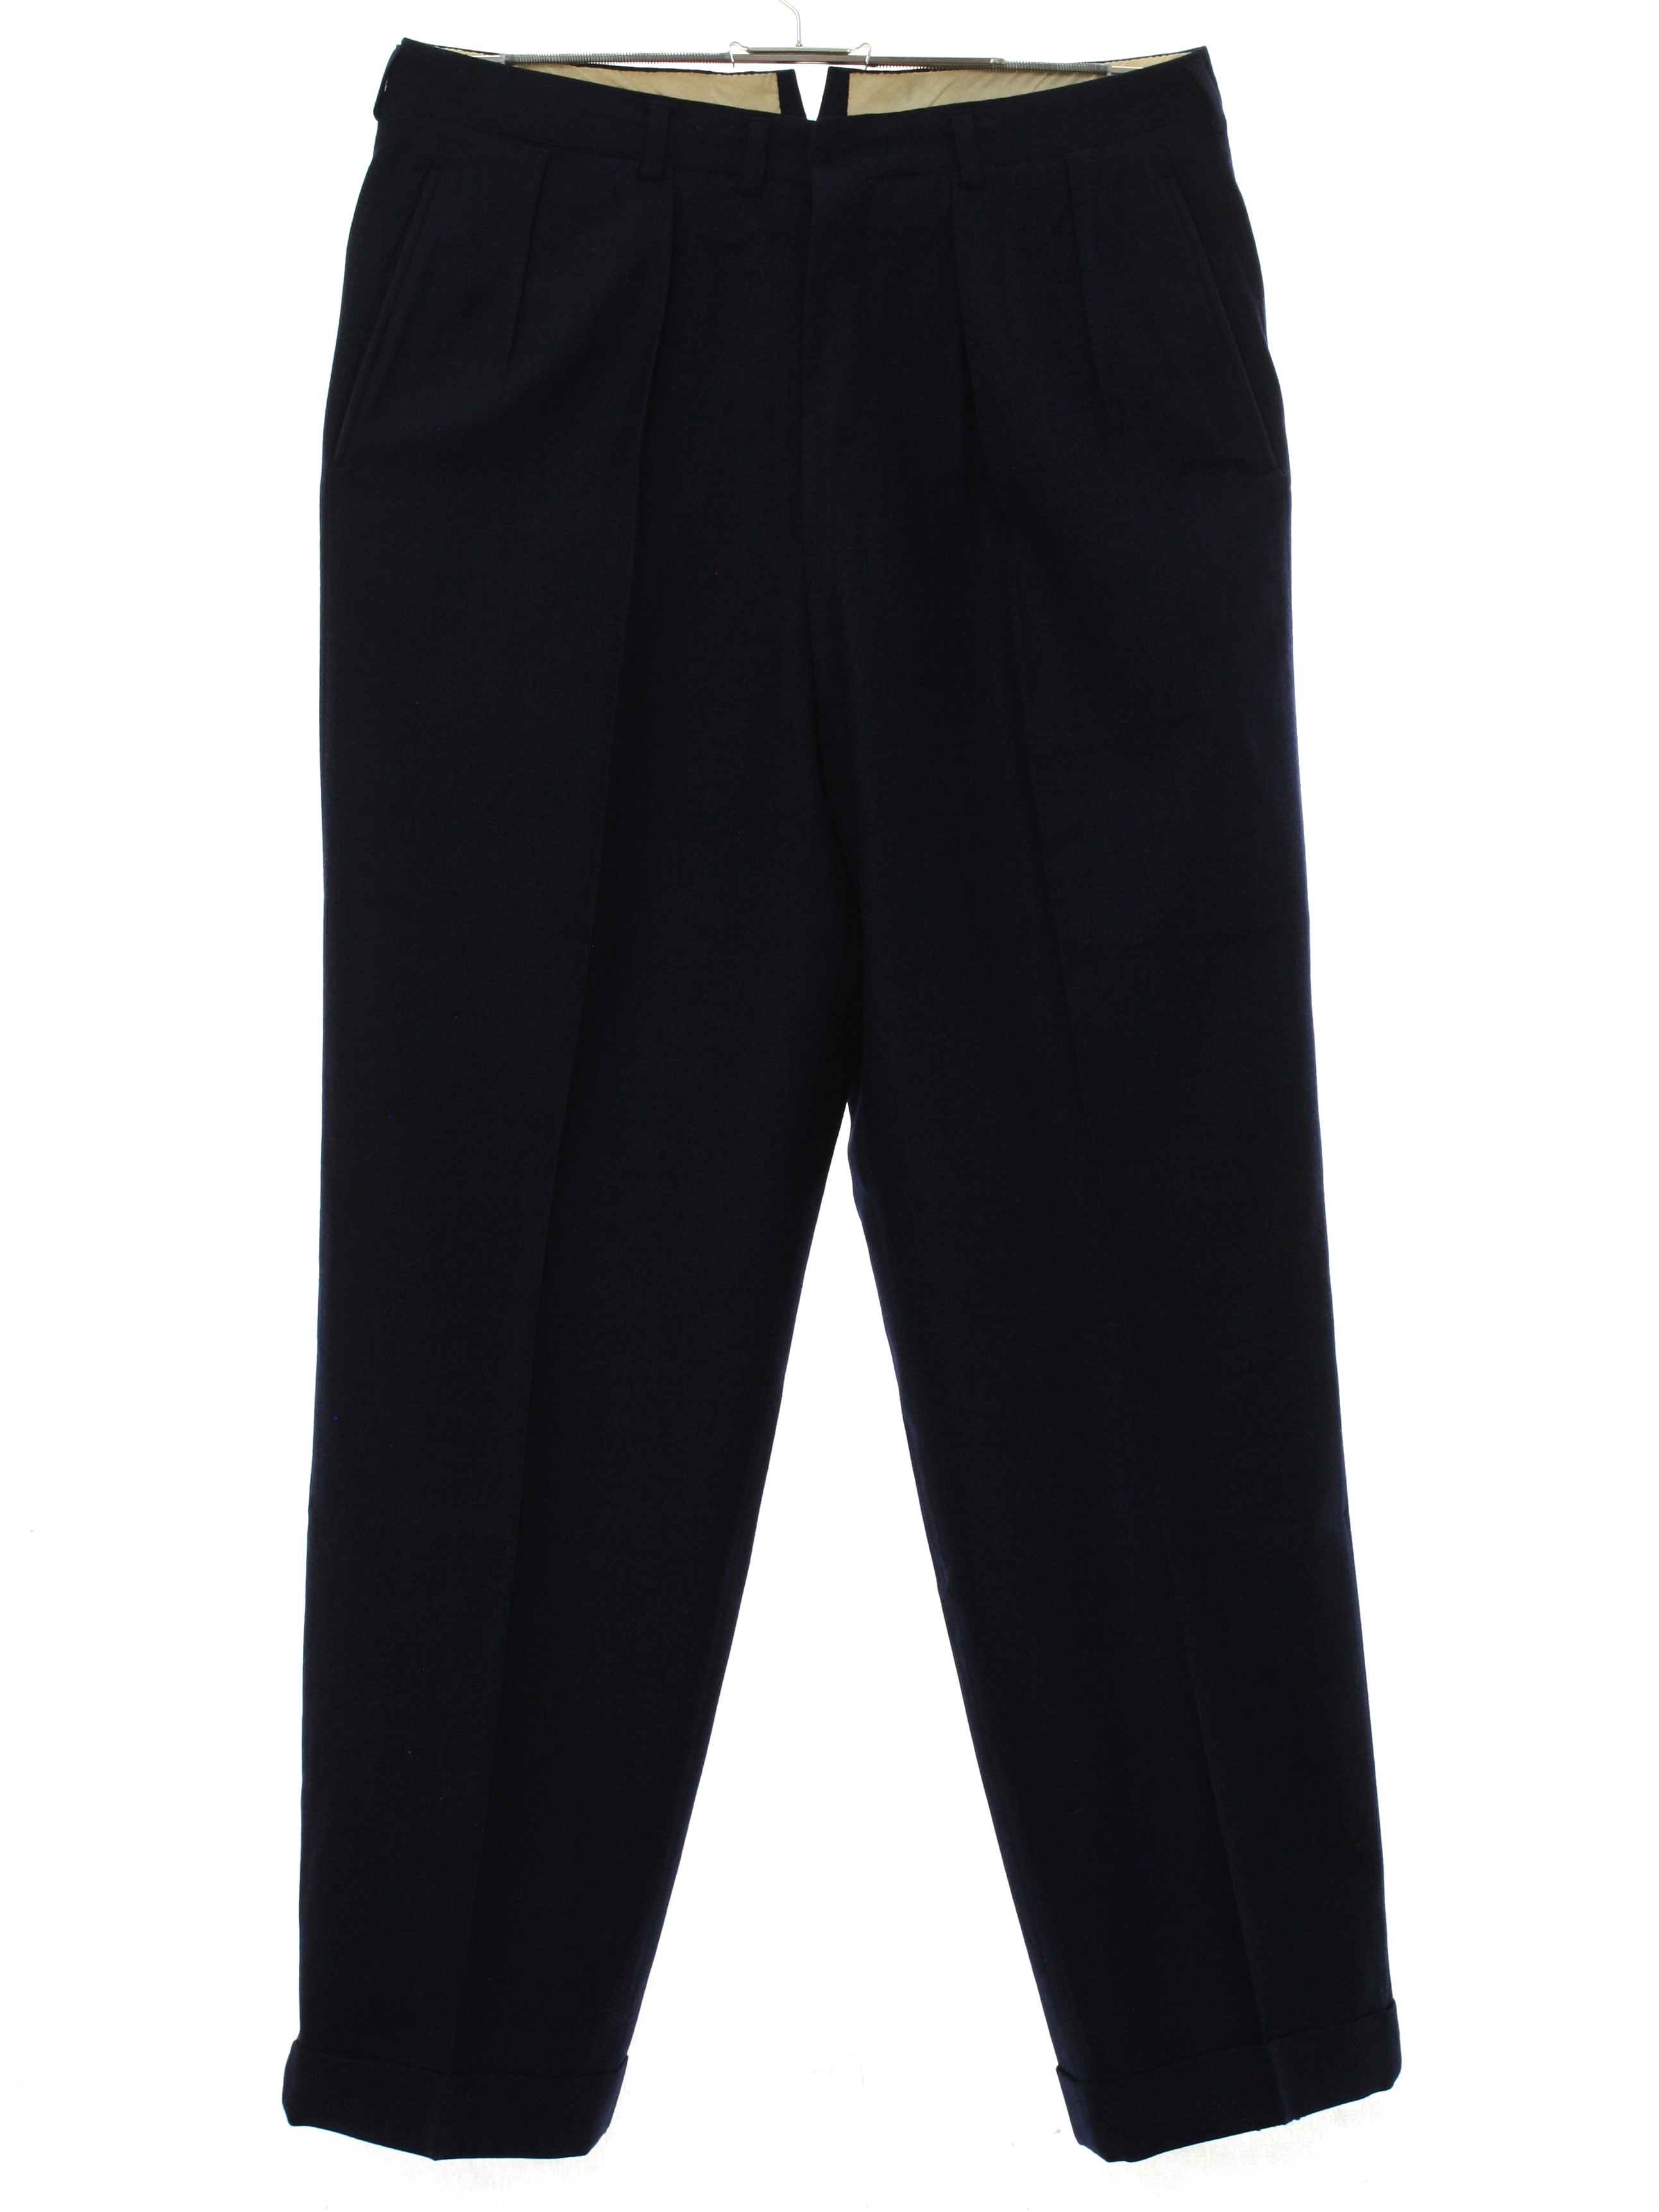 Retro 50s Pants: 50s -No Label- Mens navy blue wool worsted pleated ...